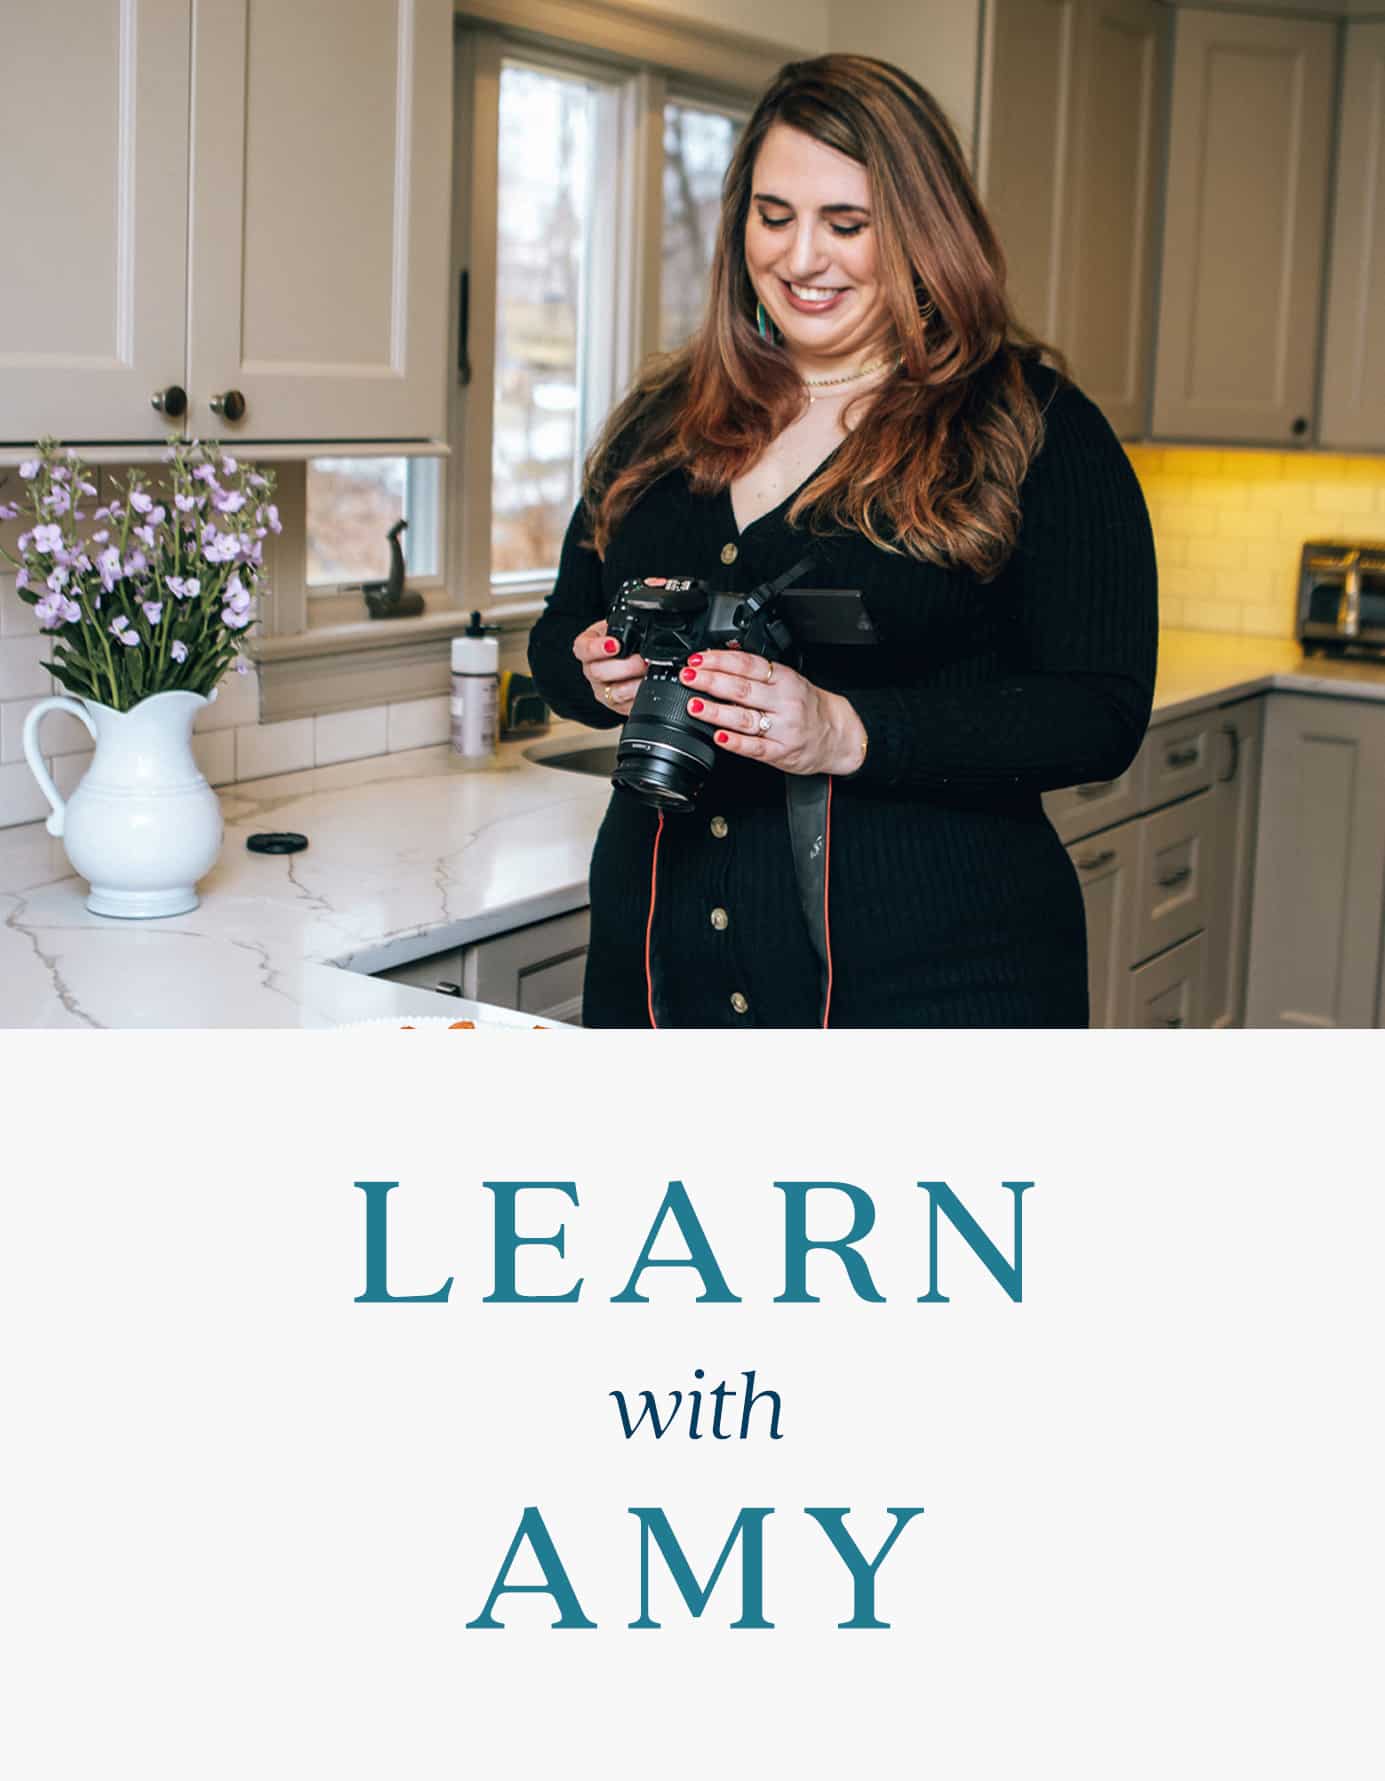 Amy Gorin looking at a camera in her kitchen, with text underneath that says Learn with Amy.